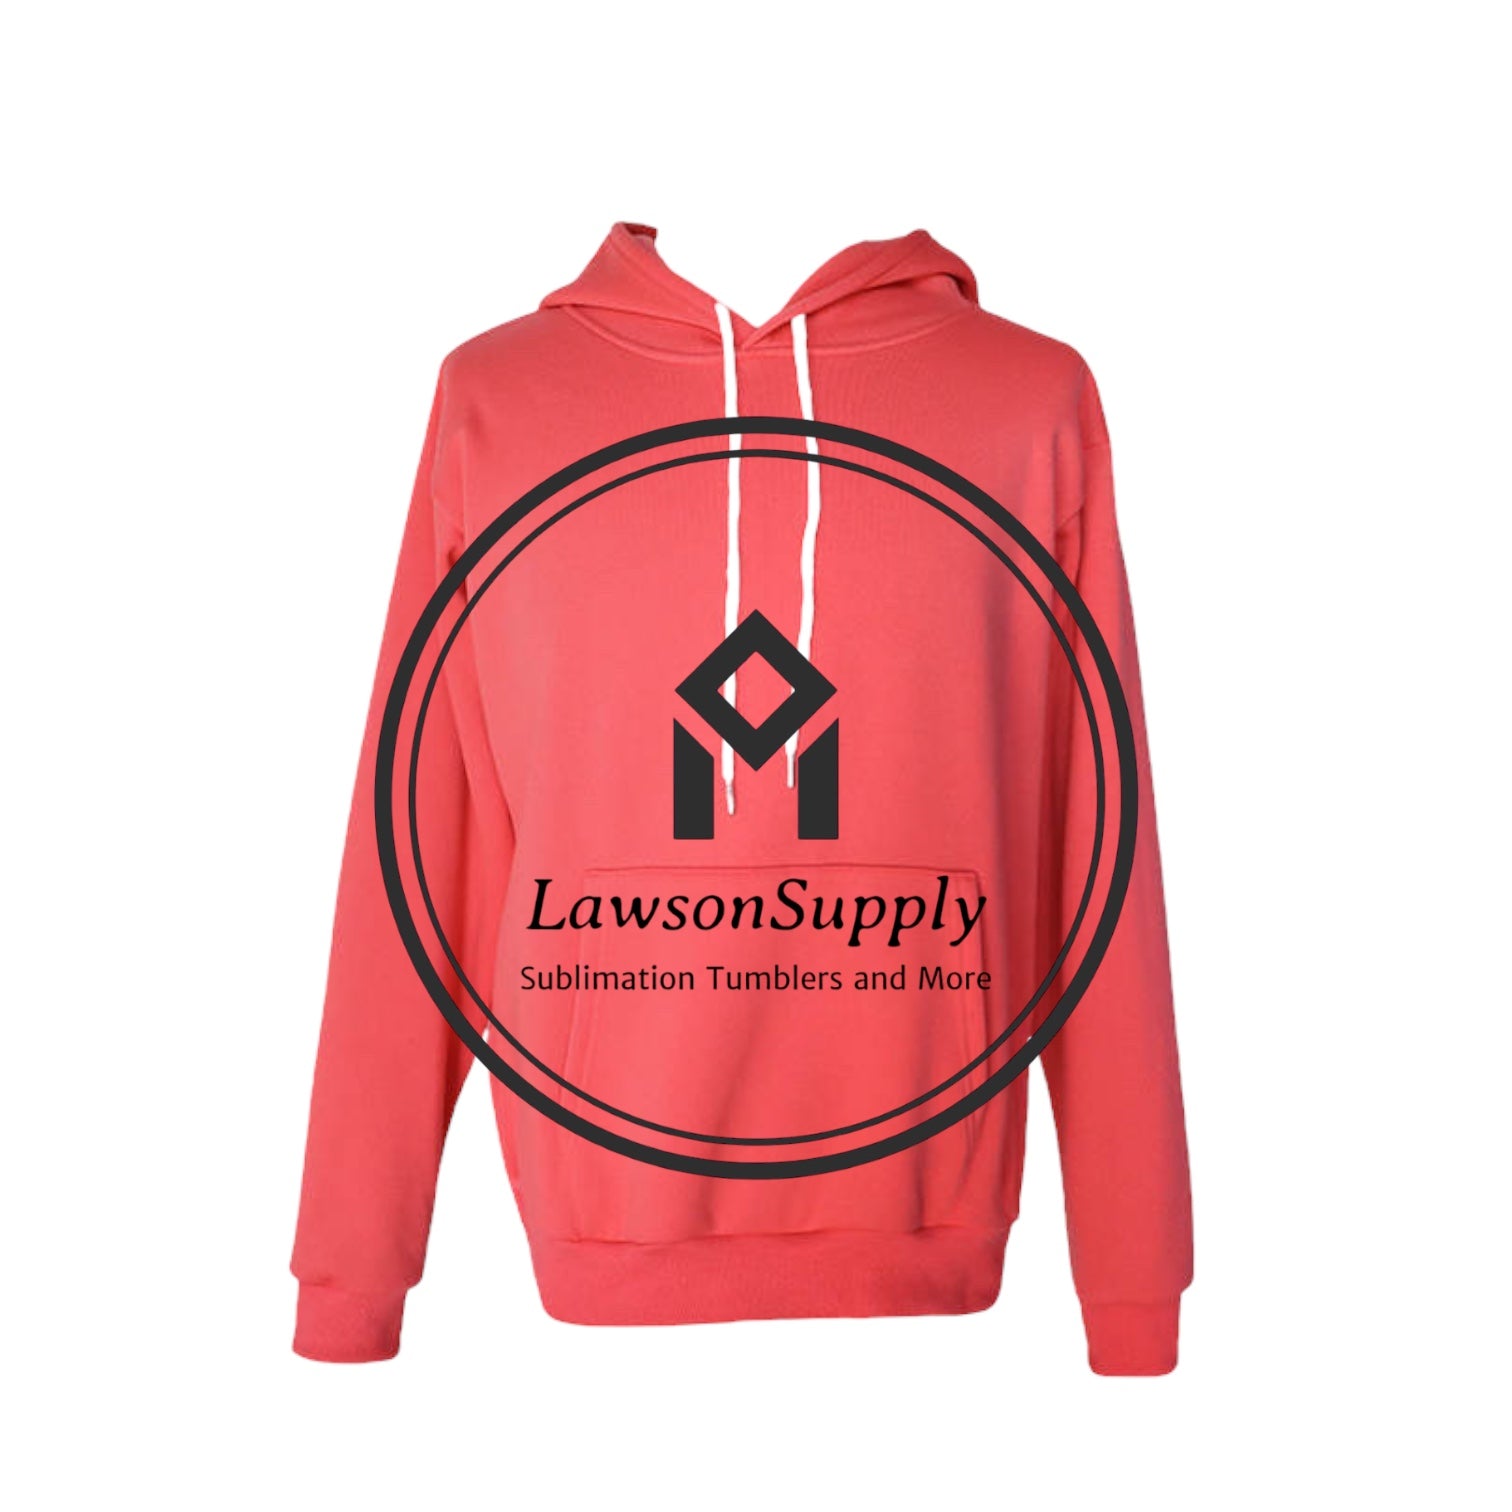 Hoodies-ADULT SIZE Soft Fleece Inner 100% Polyester Sublimation